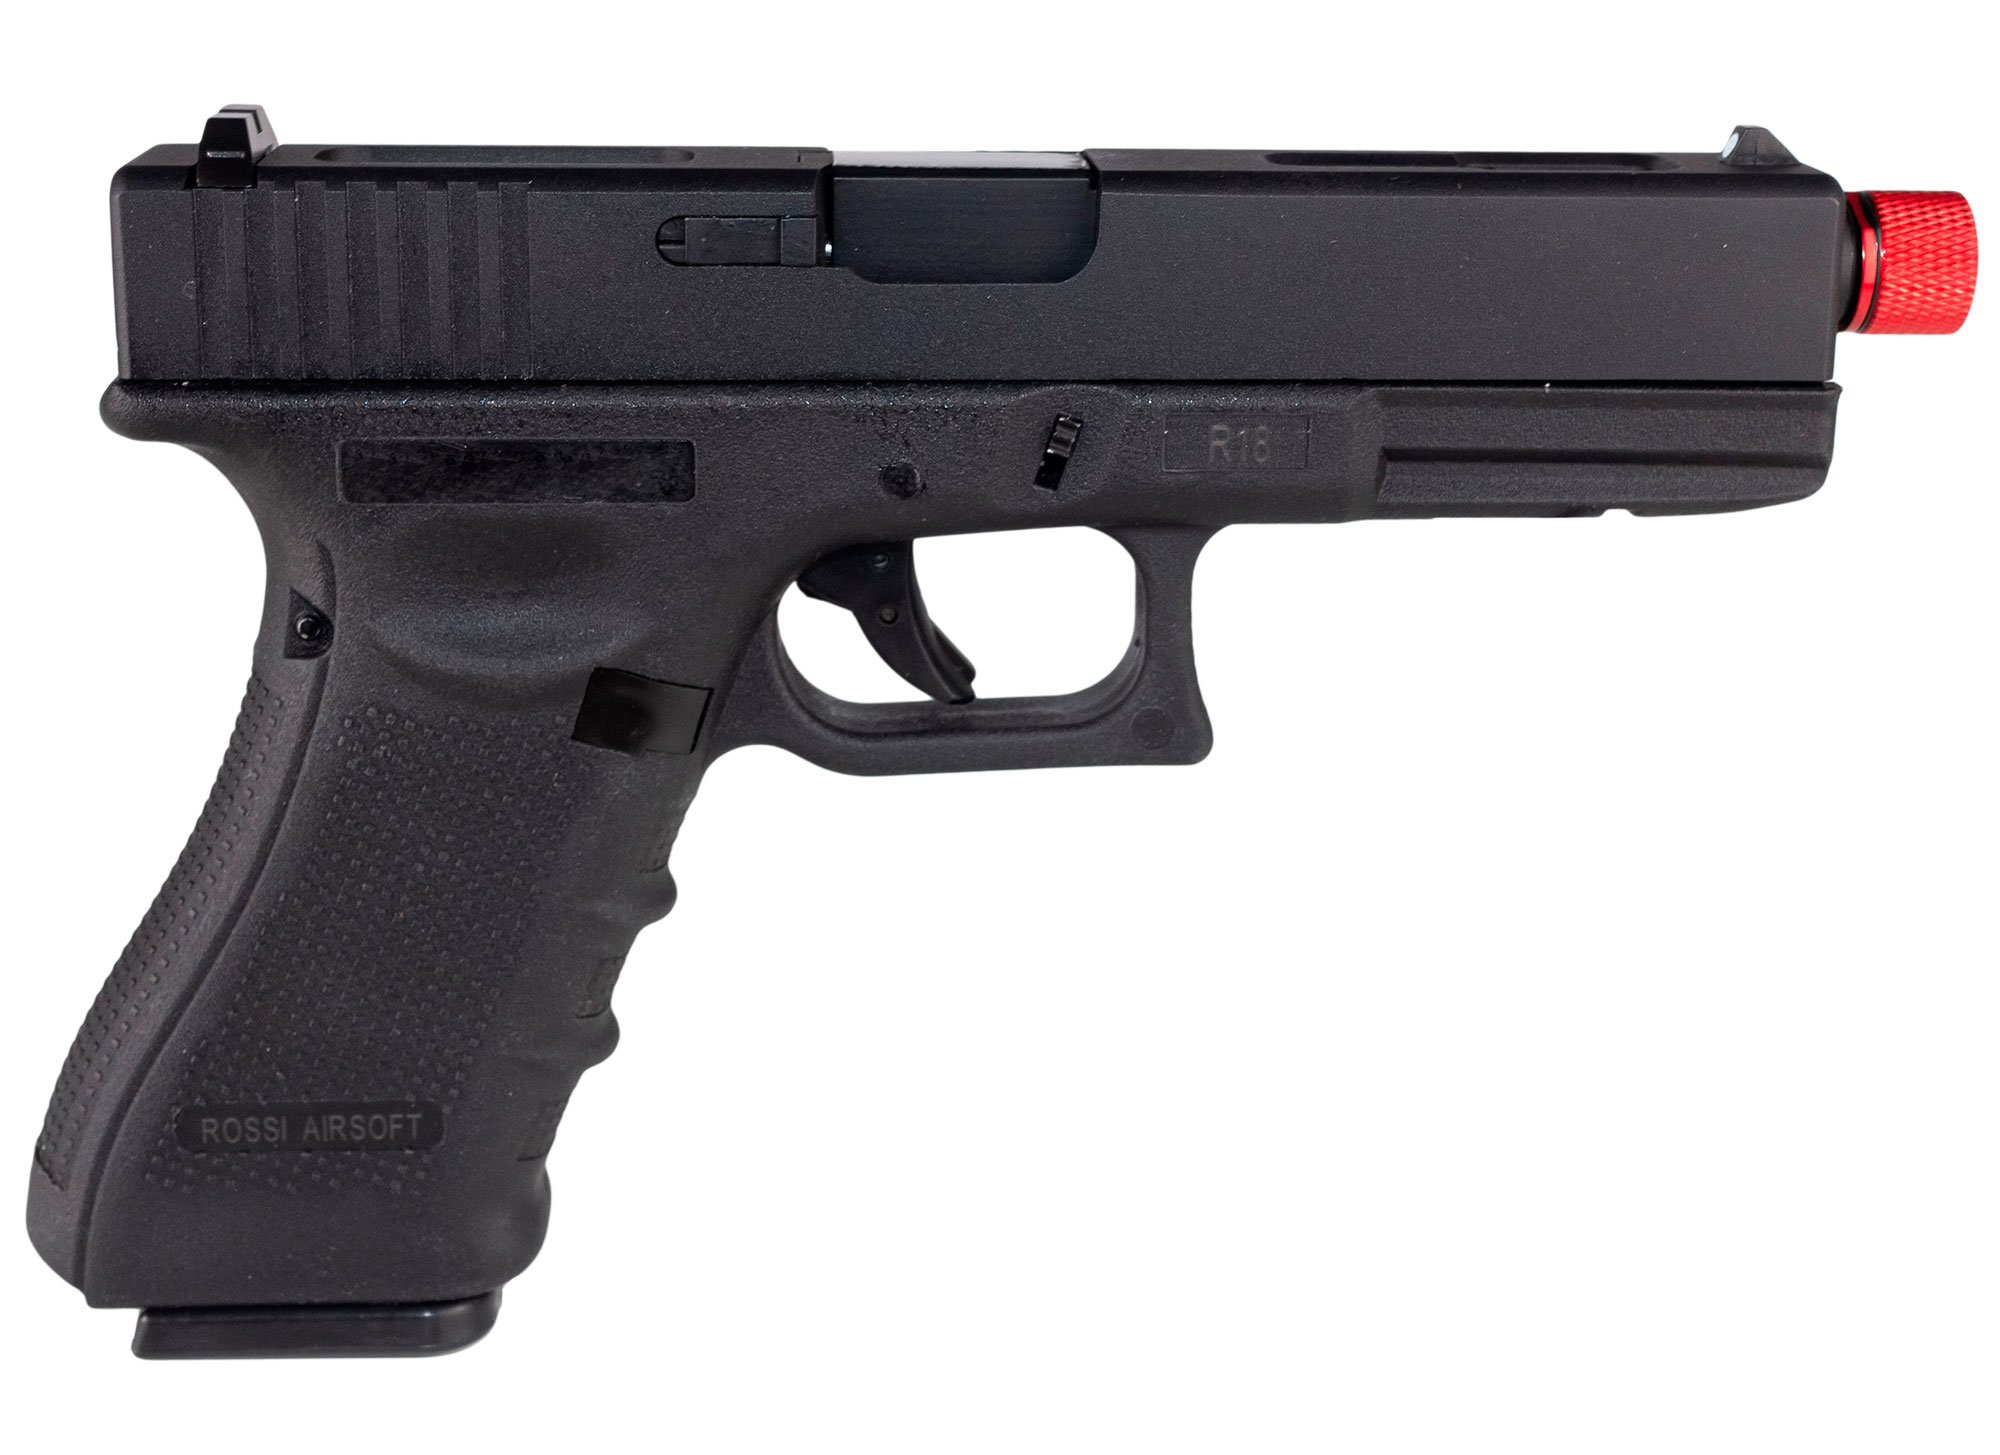 PISTOLA AIRSOFT GBB R18  - ROSSI